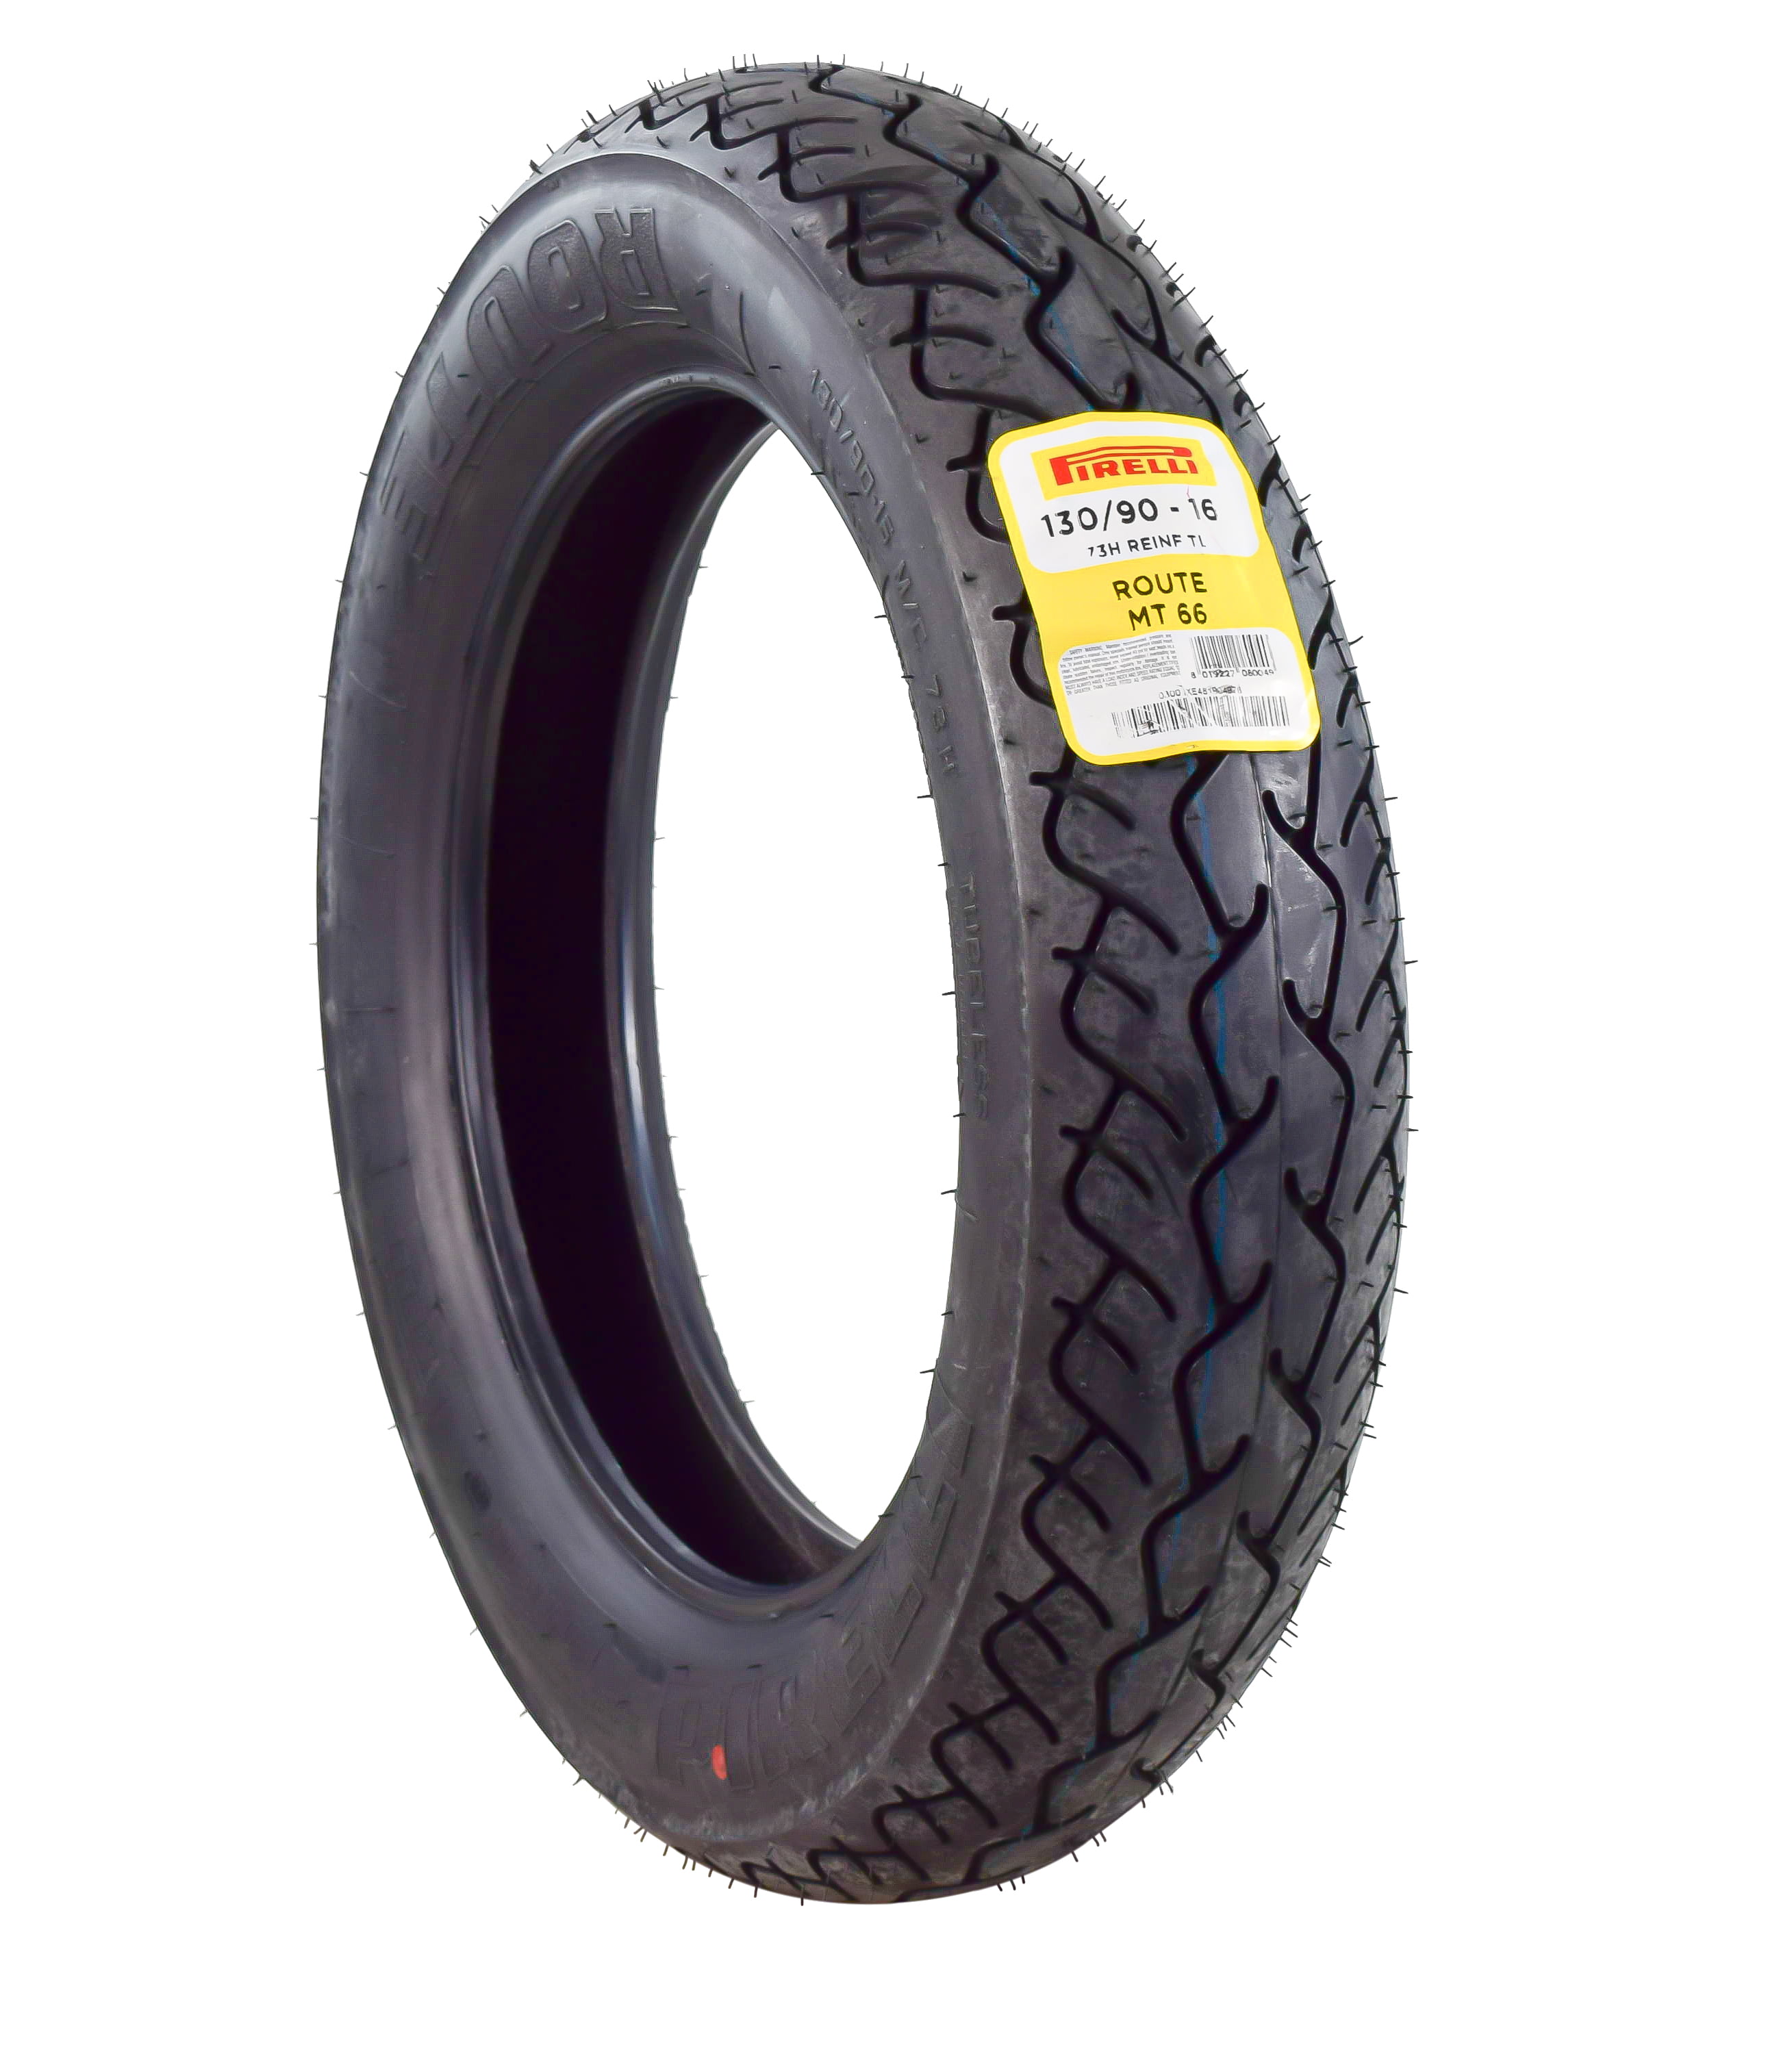 73H Pirelli MT66-Route Rear Motorcycle Tire for Harley-Davidson Electra-Glide Standard FLHT/I 1995-1998 130/90-16 